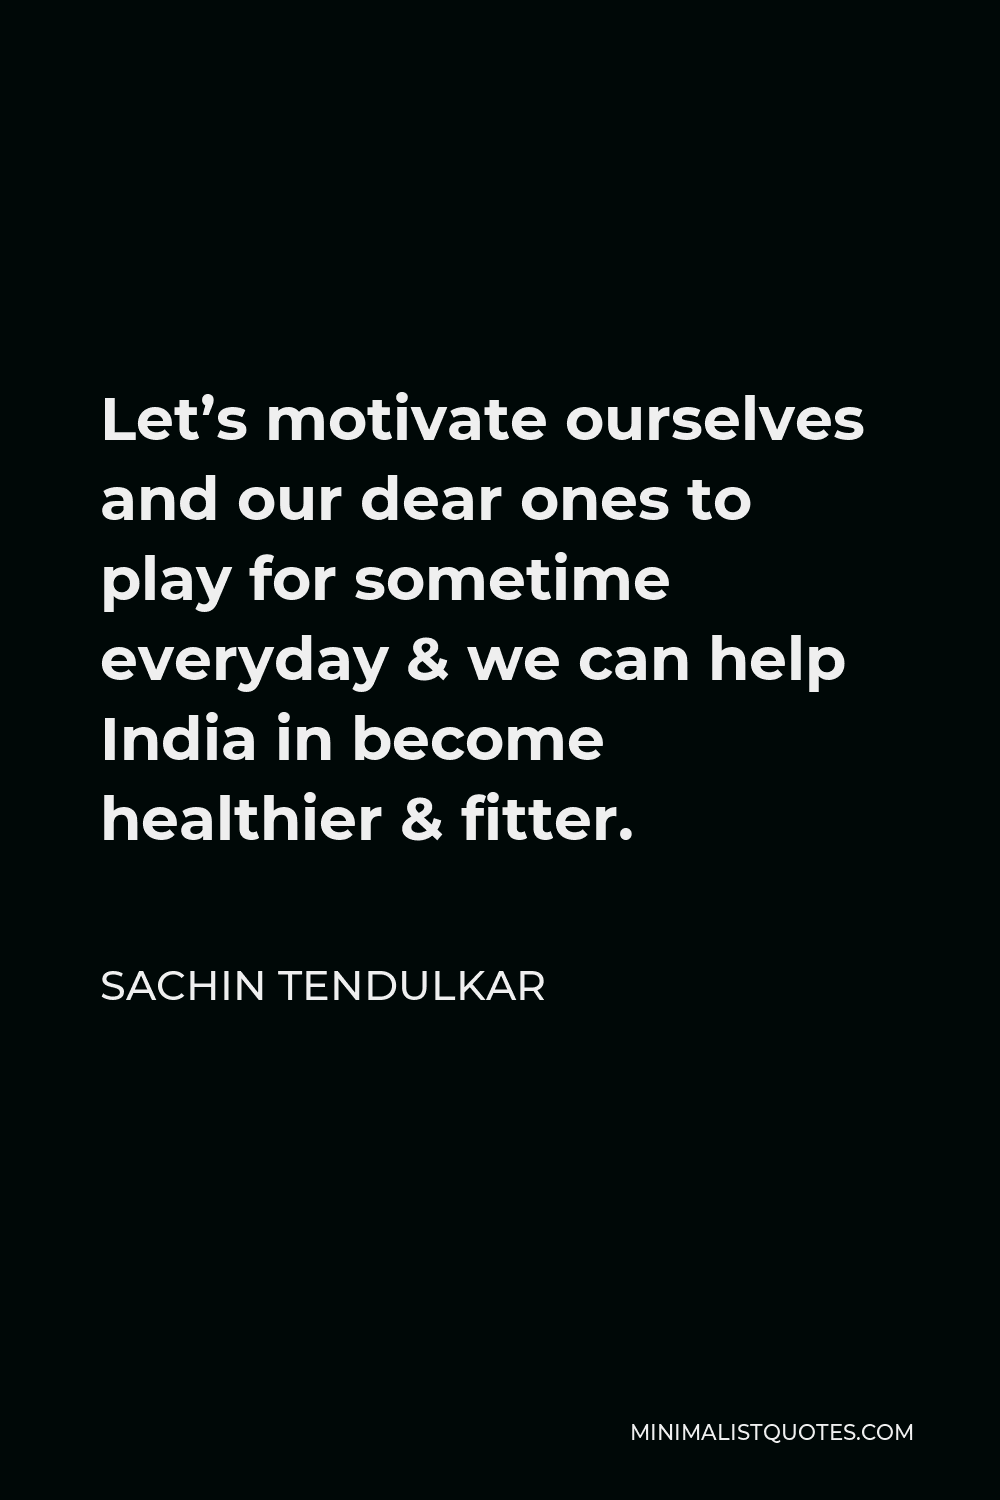 Sachin Tendulkar Quote - Let’s motivate ourselves and our dear ones to play for sometime everyday & we can help India in become healthier & fitter.